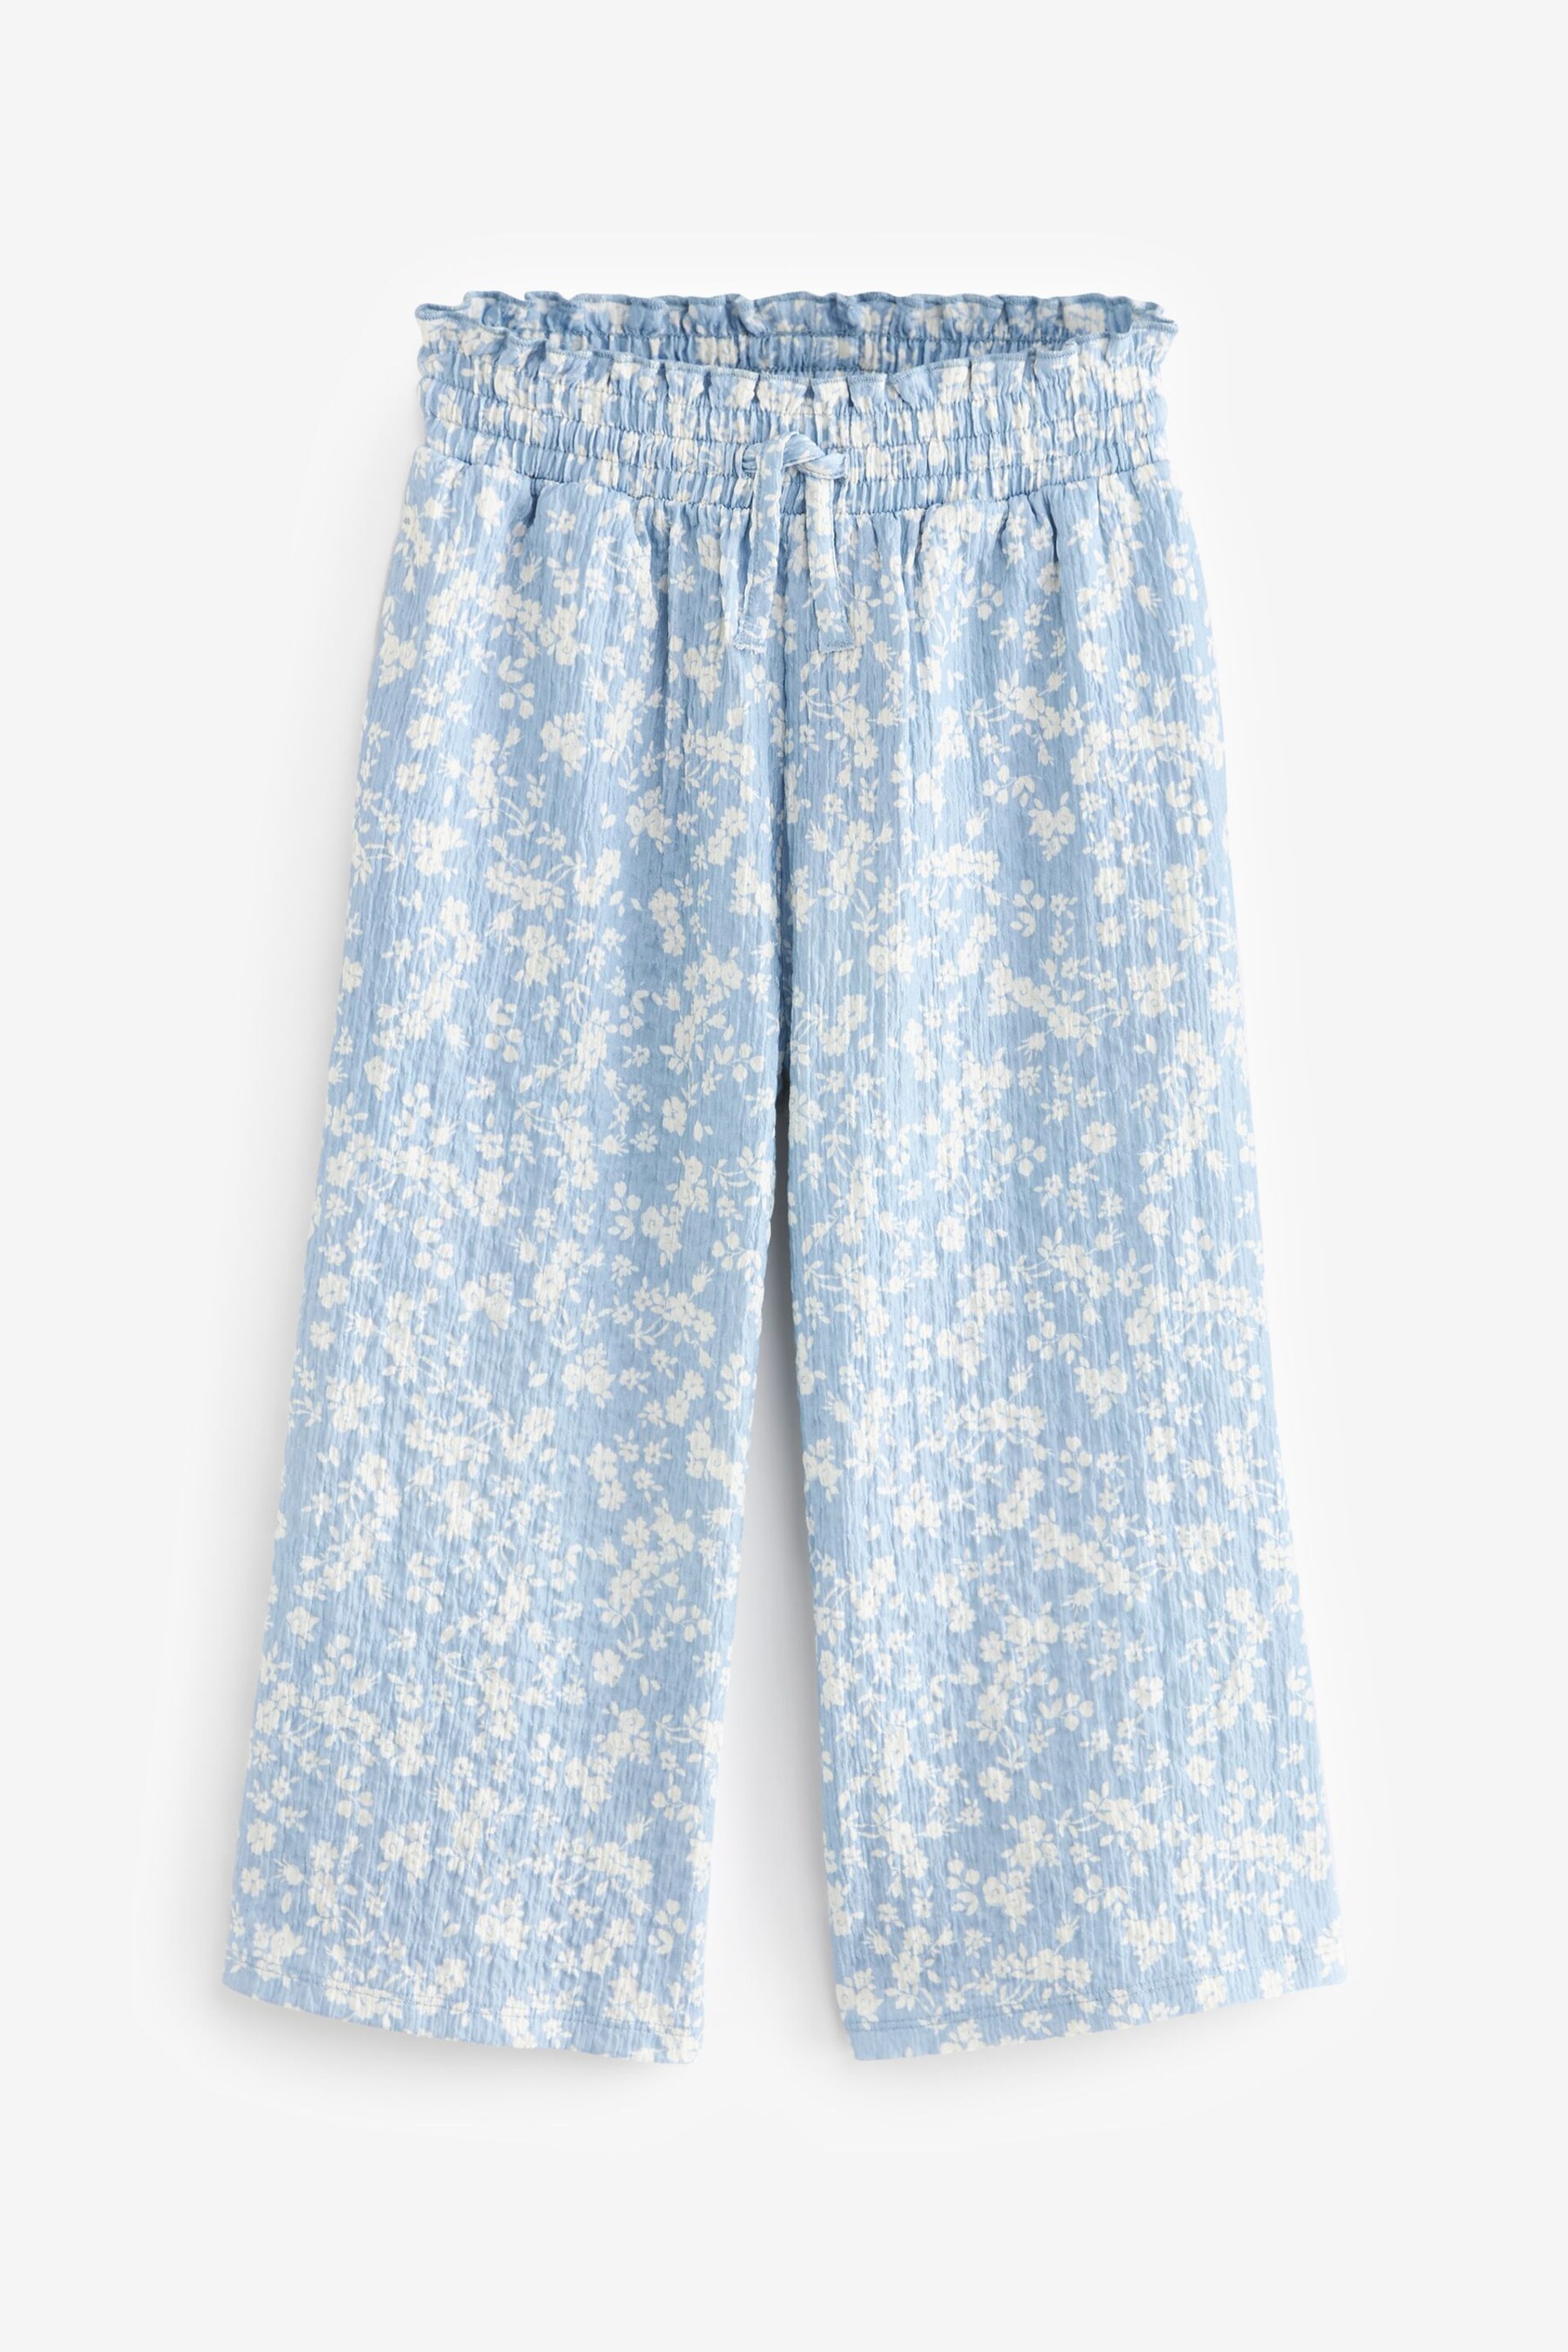 Blue/ White Floral Print Crinkle Texture Jersey Wide Leg Trousers (3-16yrs) - Image 4 of 6